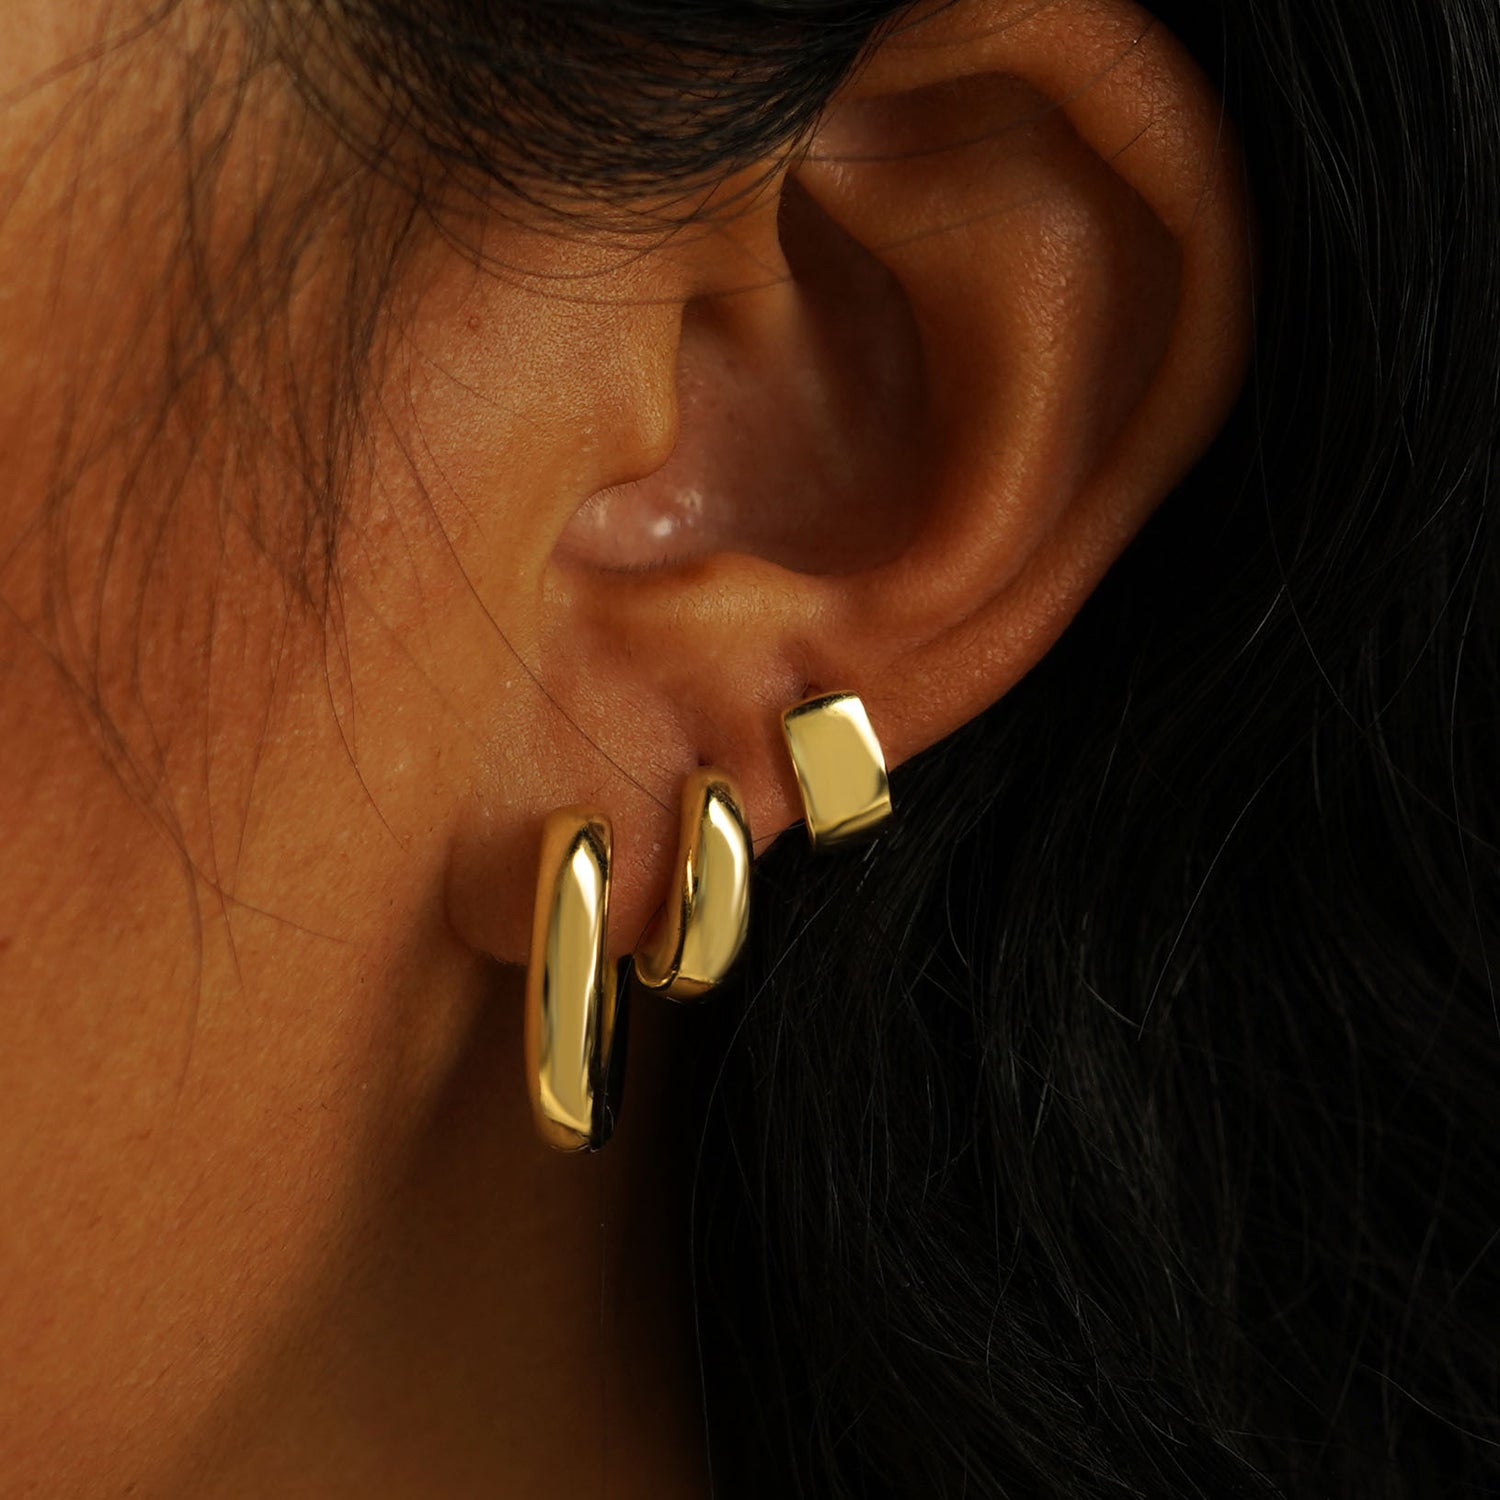 A model's ear wearing a Chunky Oval Huggie, a Small Teardrop Huggie, and an Extra Wide Huggie